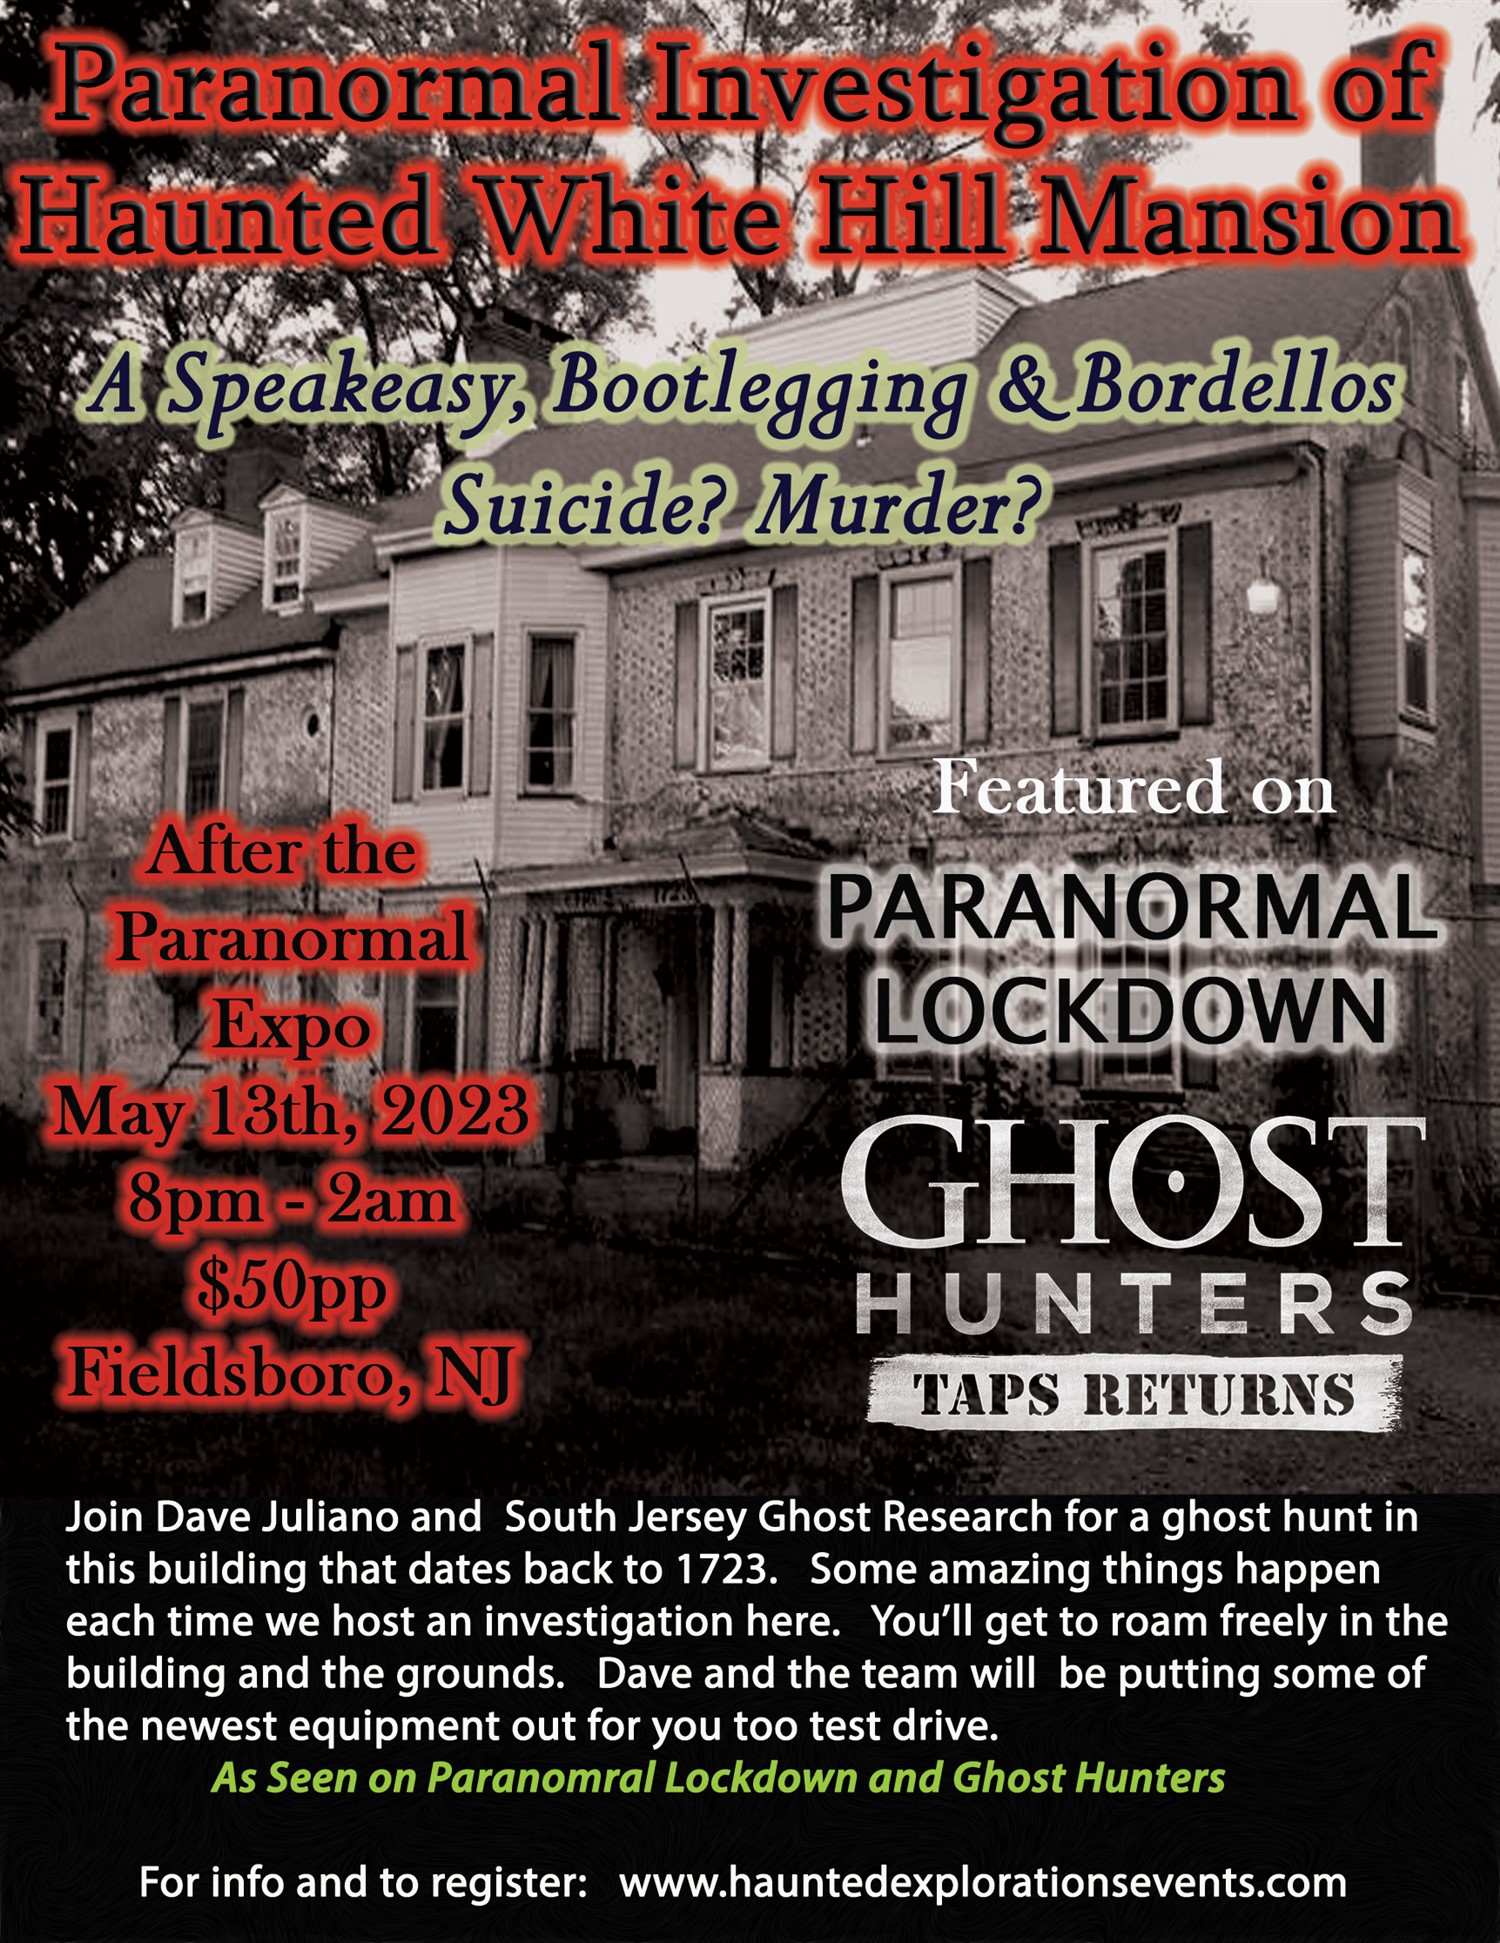 Investigate Whitehill Mansion After the Paranormal Expo on may. 13, 20:00@Whitehill Mansion - Compra entradas y obtén información enThriller Events thriller.events